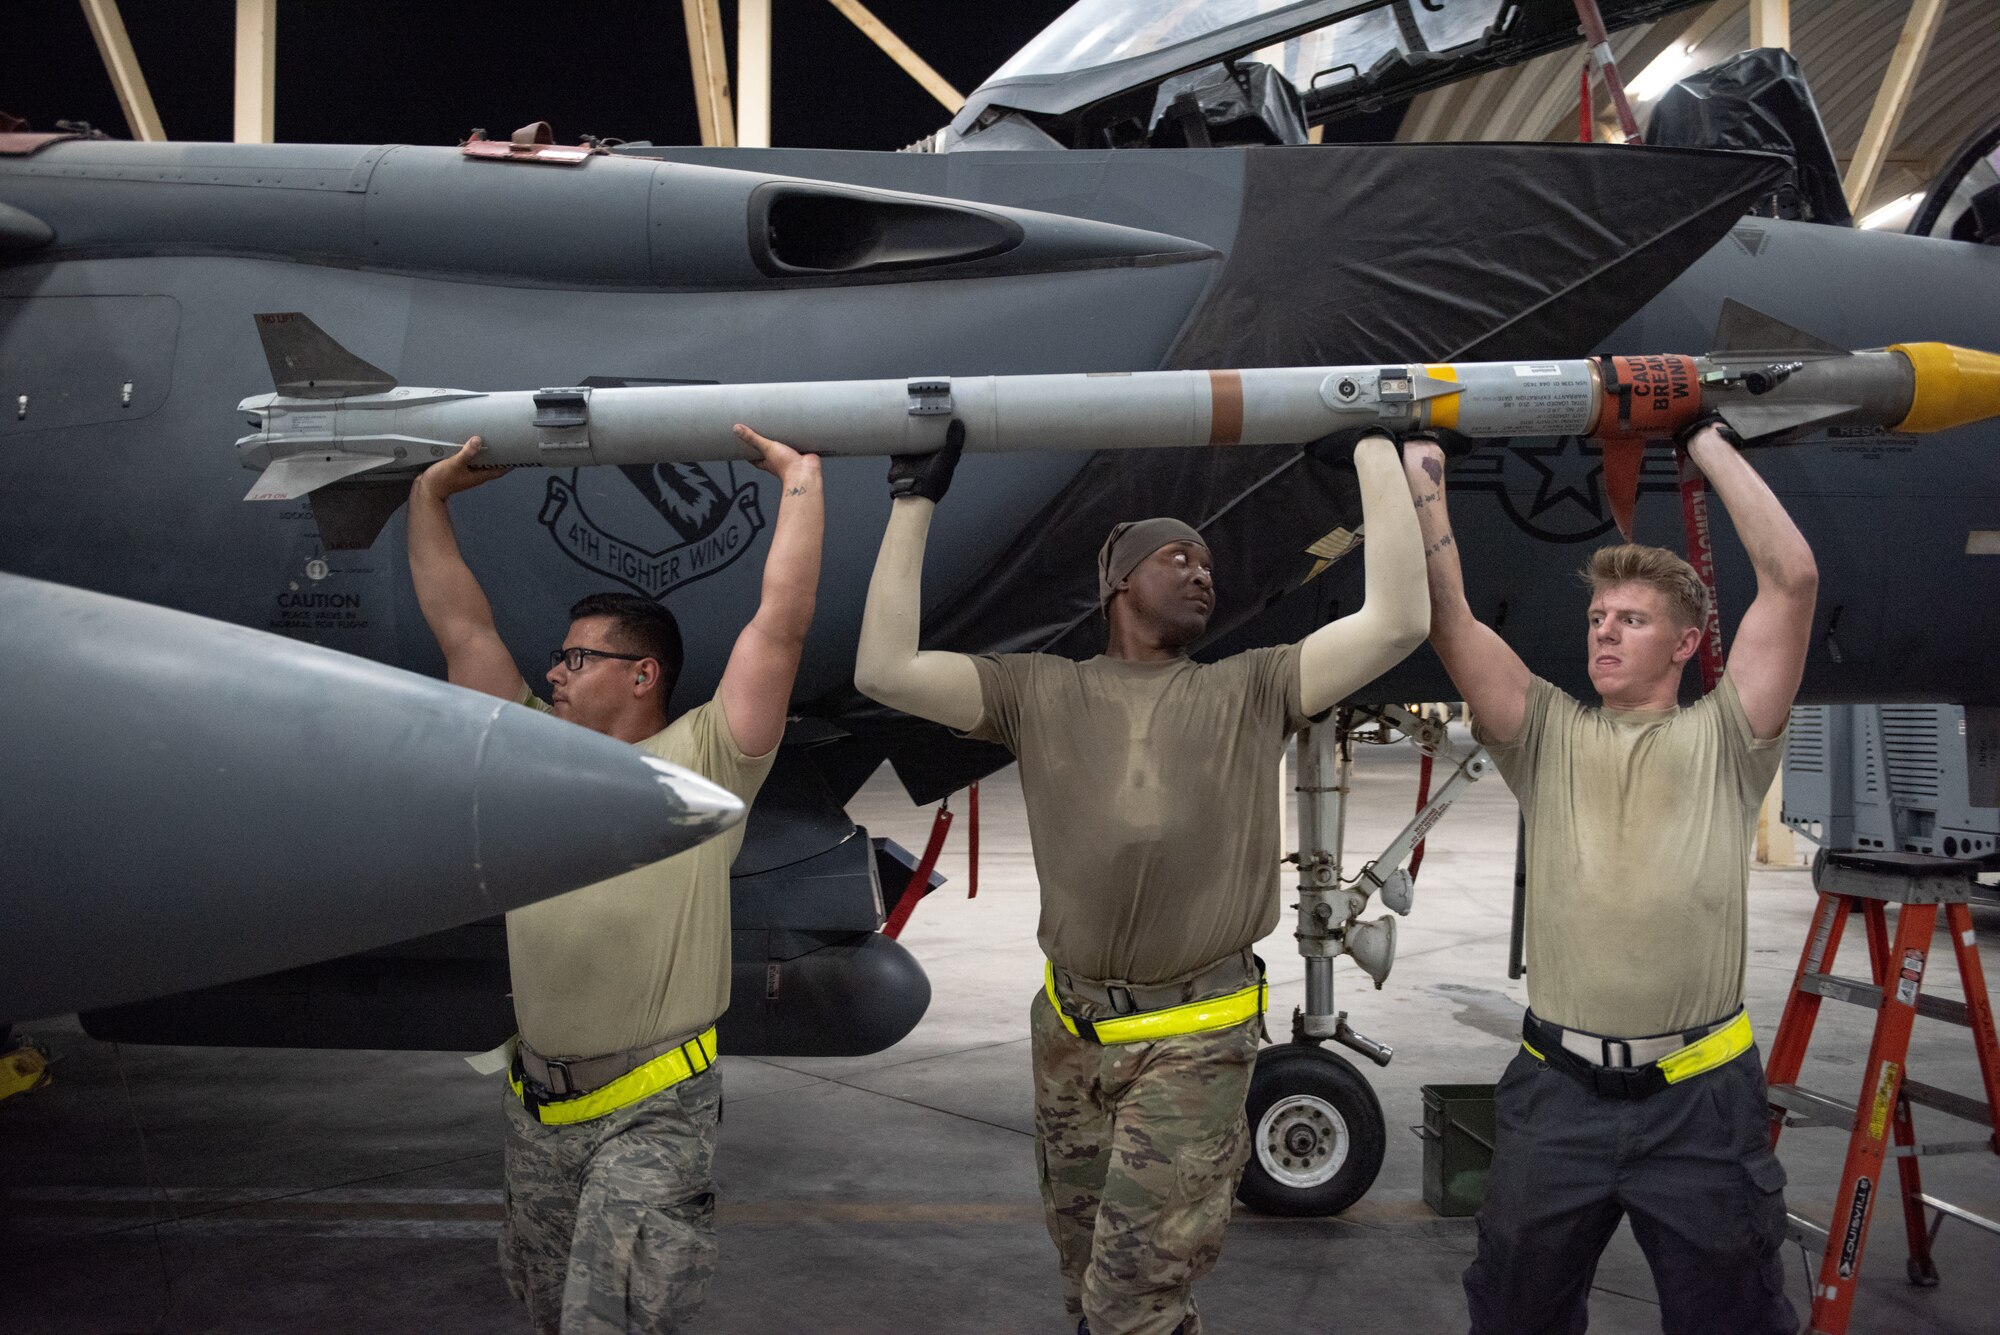 An F-15E Strike Eagle weapons load crew team lifts an AIM-9X Sidewinder missile to attach to a pylon July 15, 2019, at Al Dhafra Air Base, United Arab Emirates. The AIM-9X is an advanced infrared missile and the newest of the Sidewinder family of short-range air-to-air missiles carried on a wide range of fighter jets. (U.S. Air Force photo by Staff Sgt. Chris Thornbury)